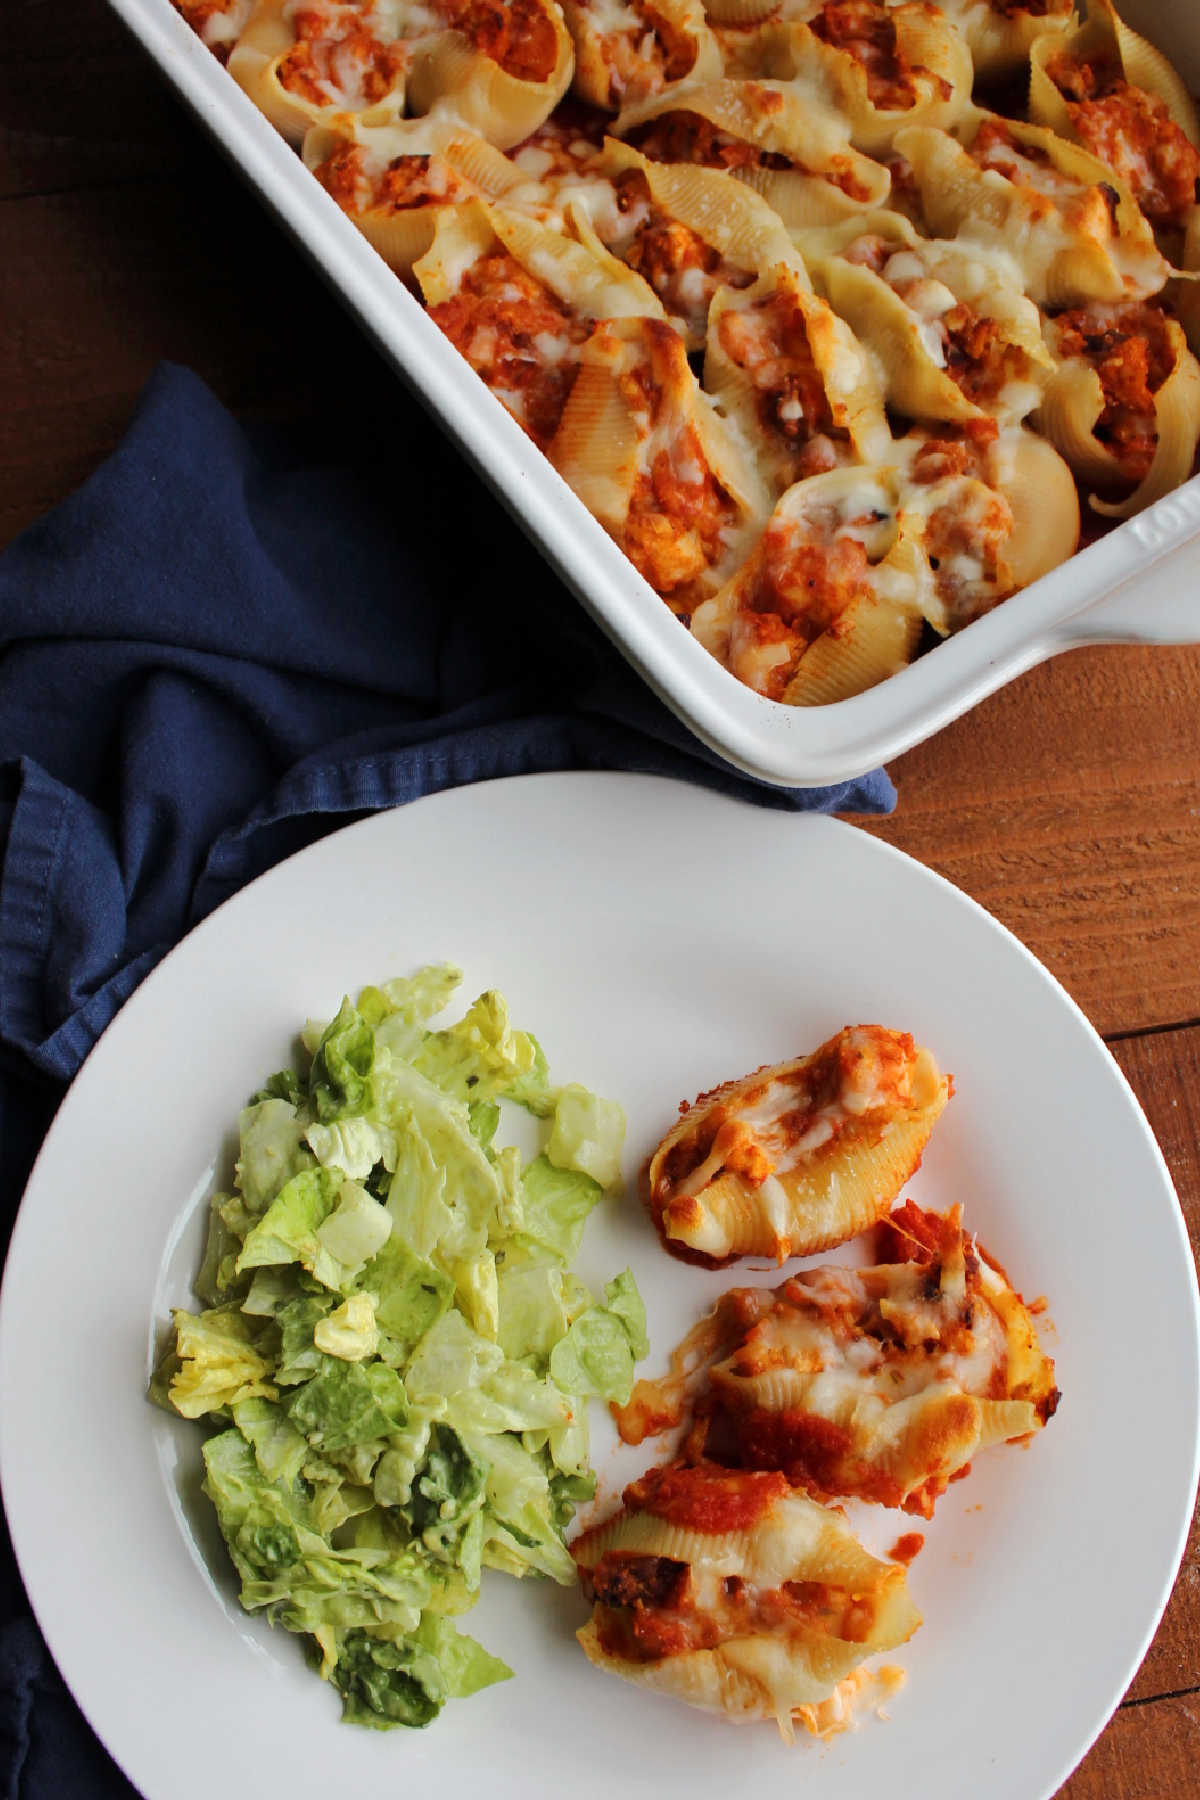 Chicken parmesan stuffed shells served on plate with a green salad.